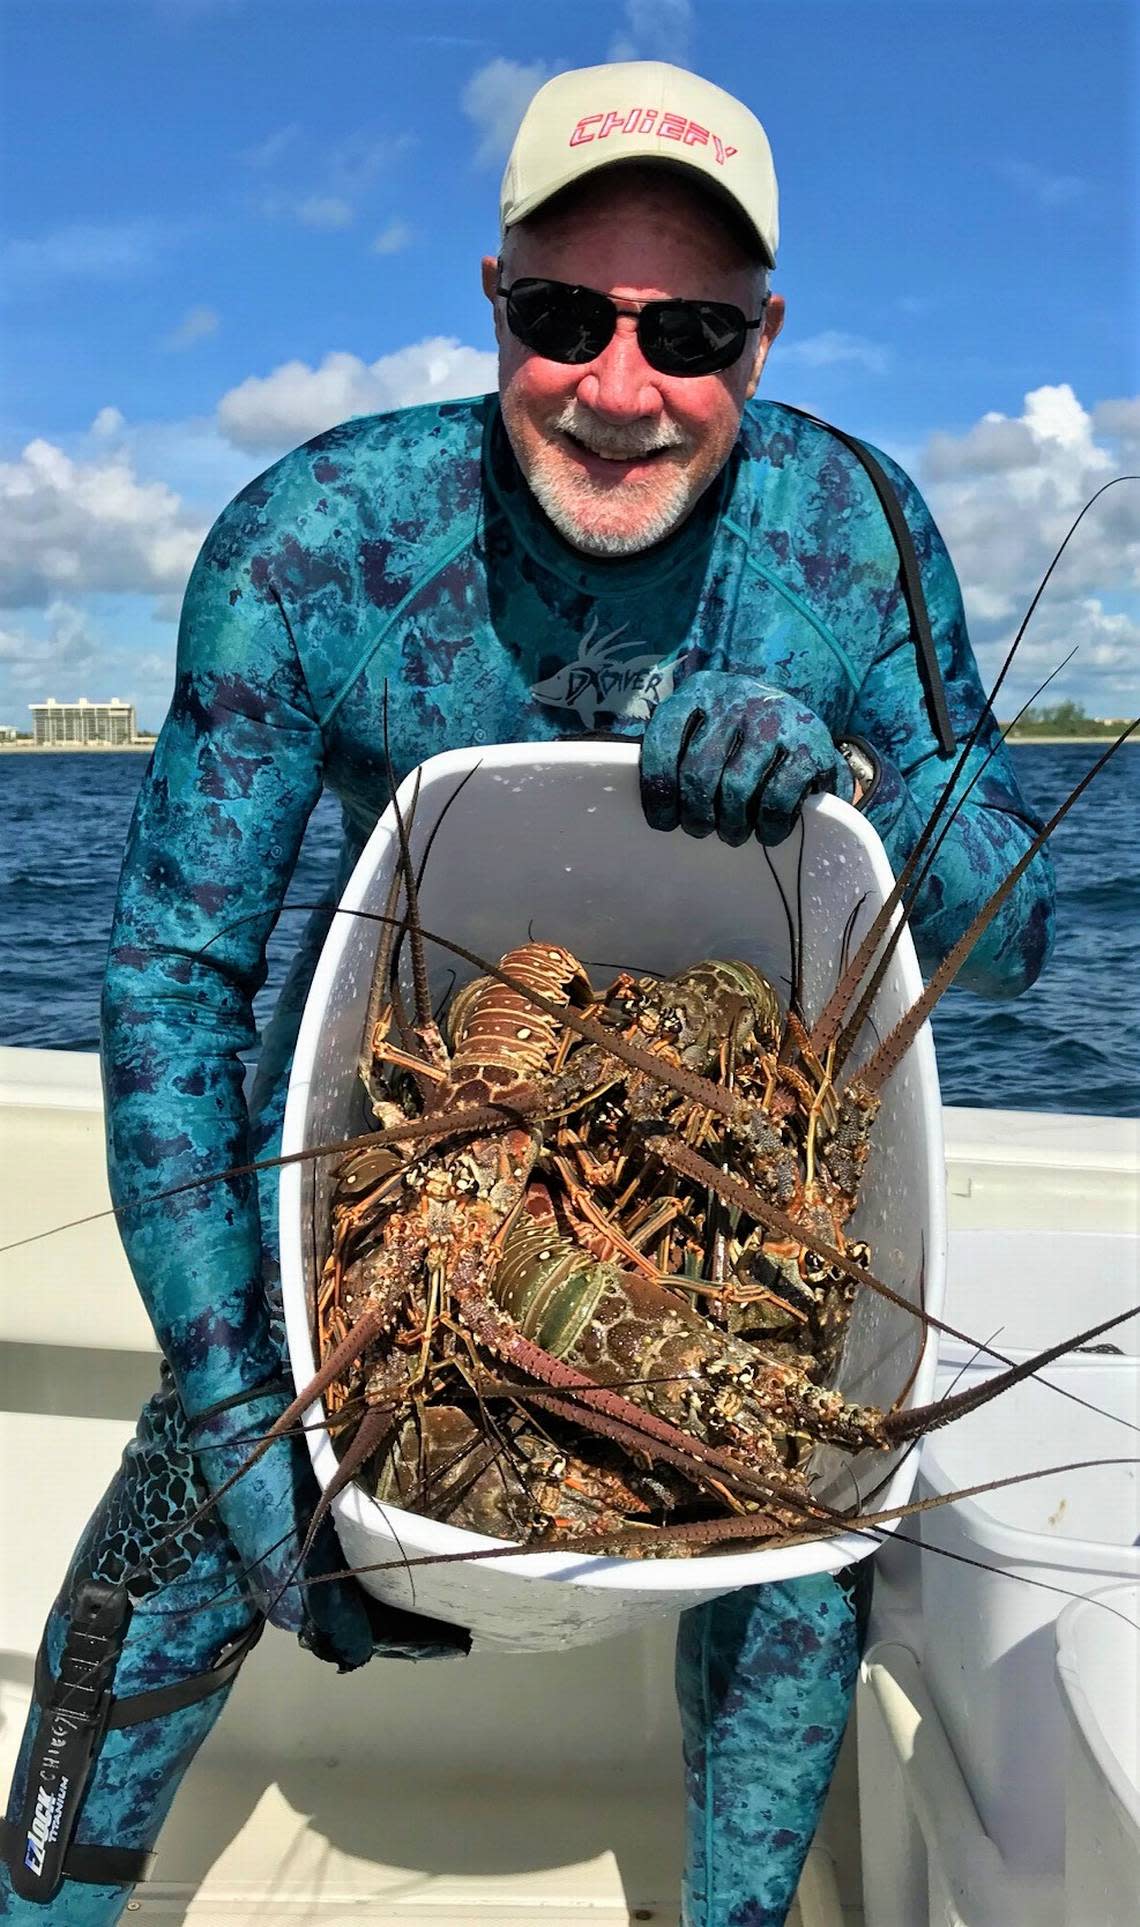 Jim “Chiefy” Mathie of Deerfield Beach is hopeful that this year’s lobster miniseason, which is July 29-30, will be much better than last year’s miniseason.